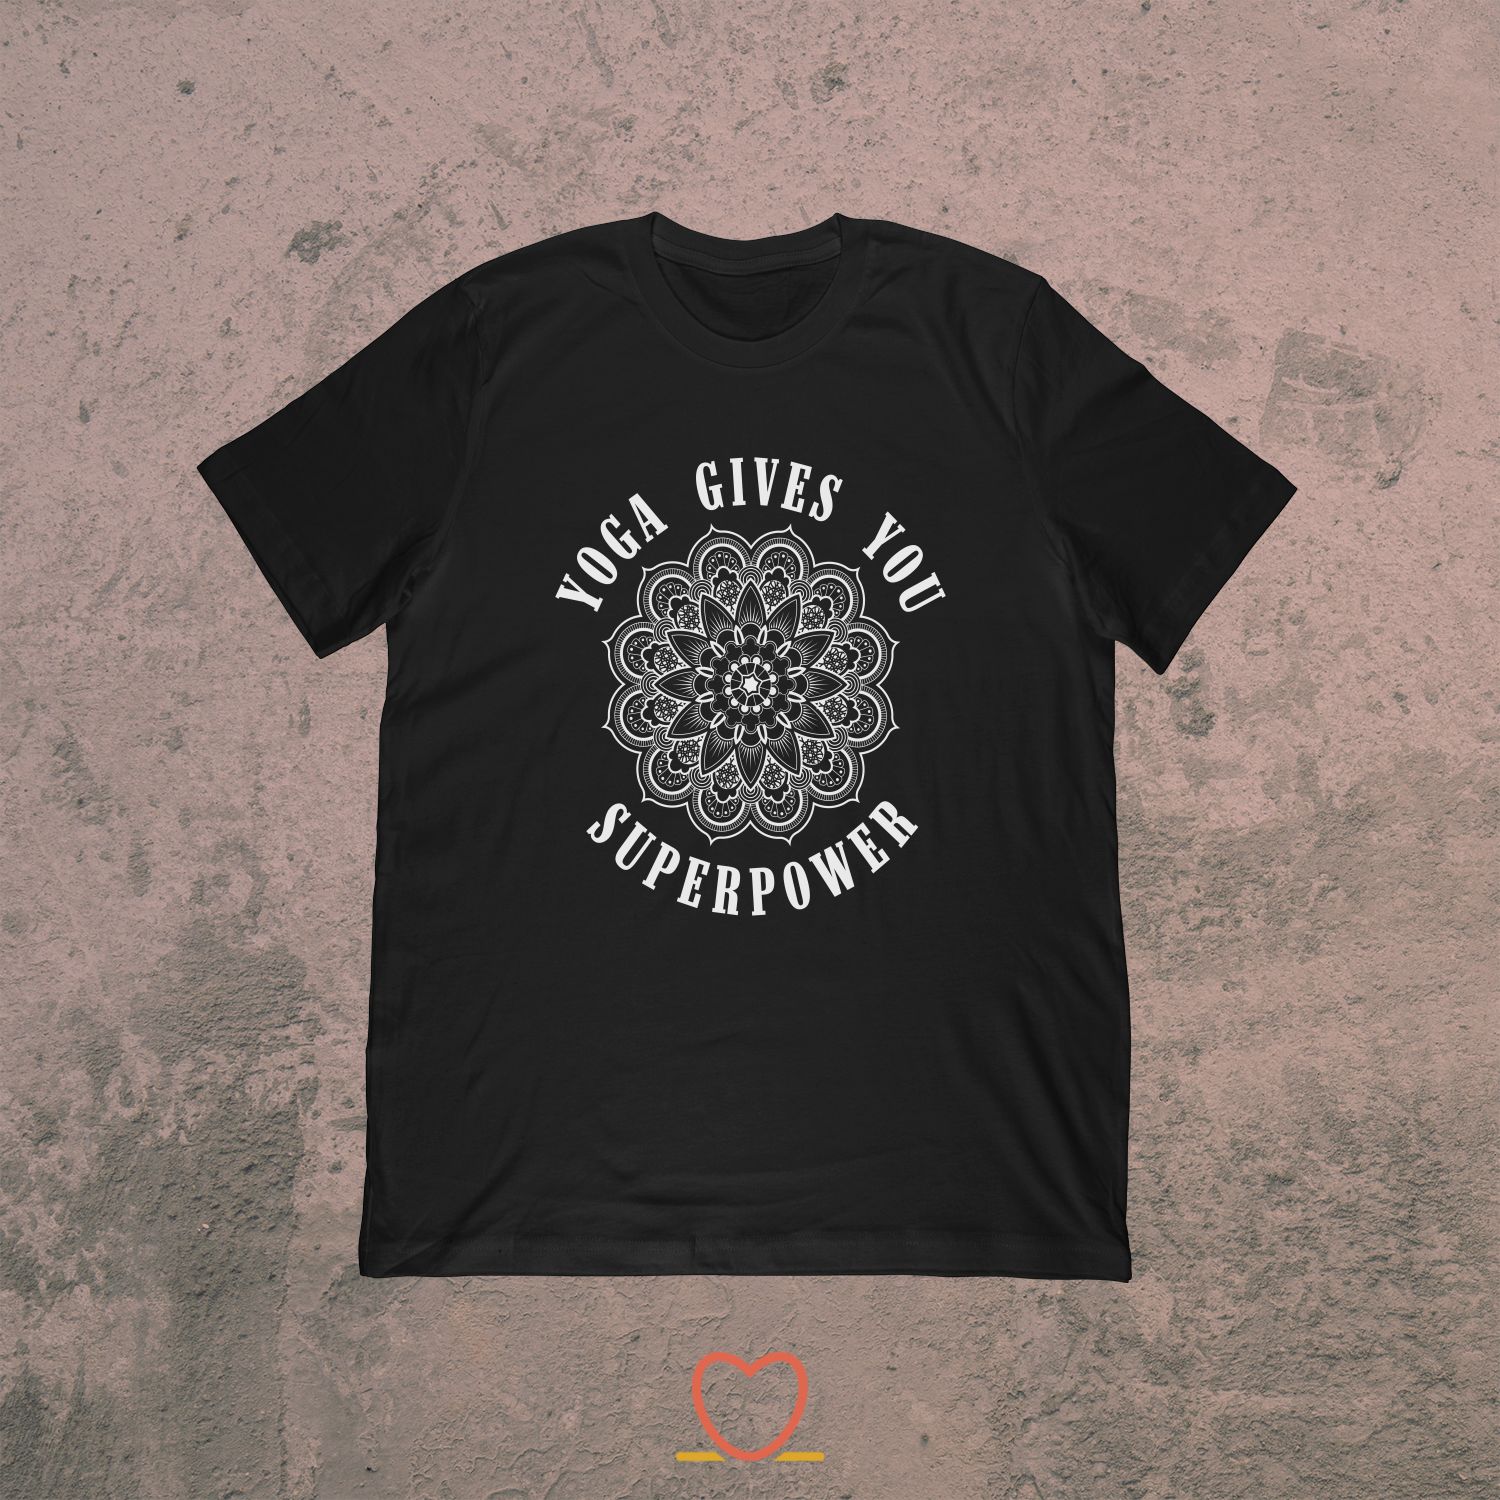 Yoga Gives You Superpower – Yoga And Meditation Tee